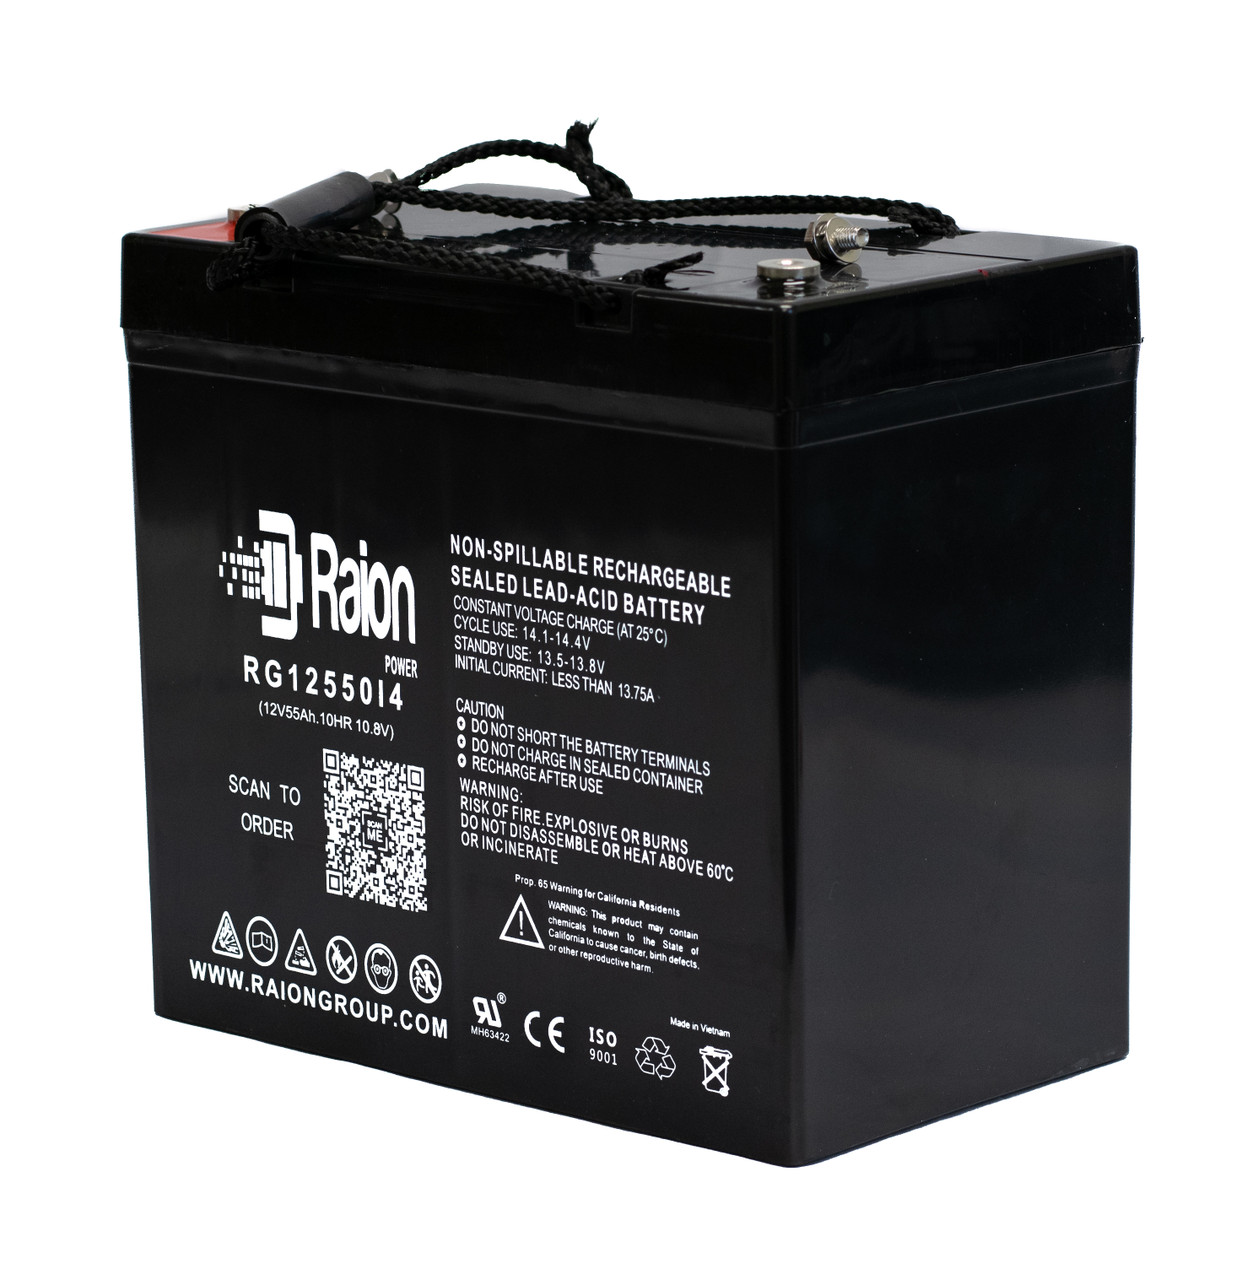 Raion Power 12V 55Ah 22NF Mobility Scooter Battery Replacement for Pride Mobility Jazzy 614